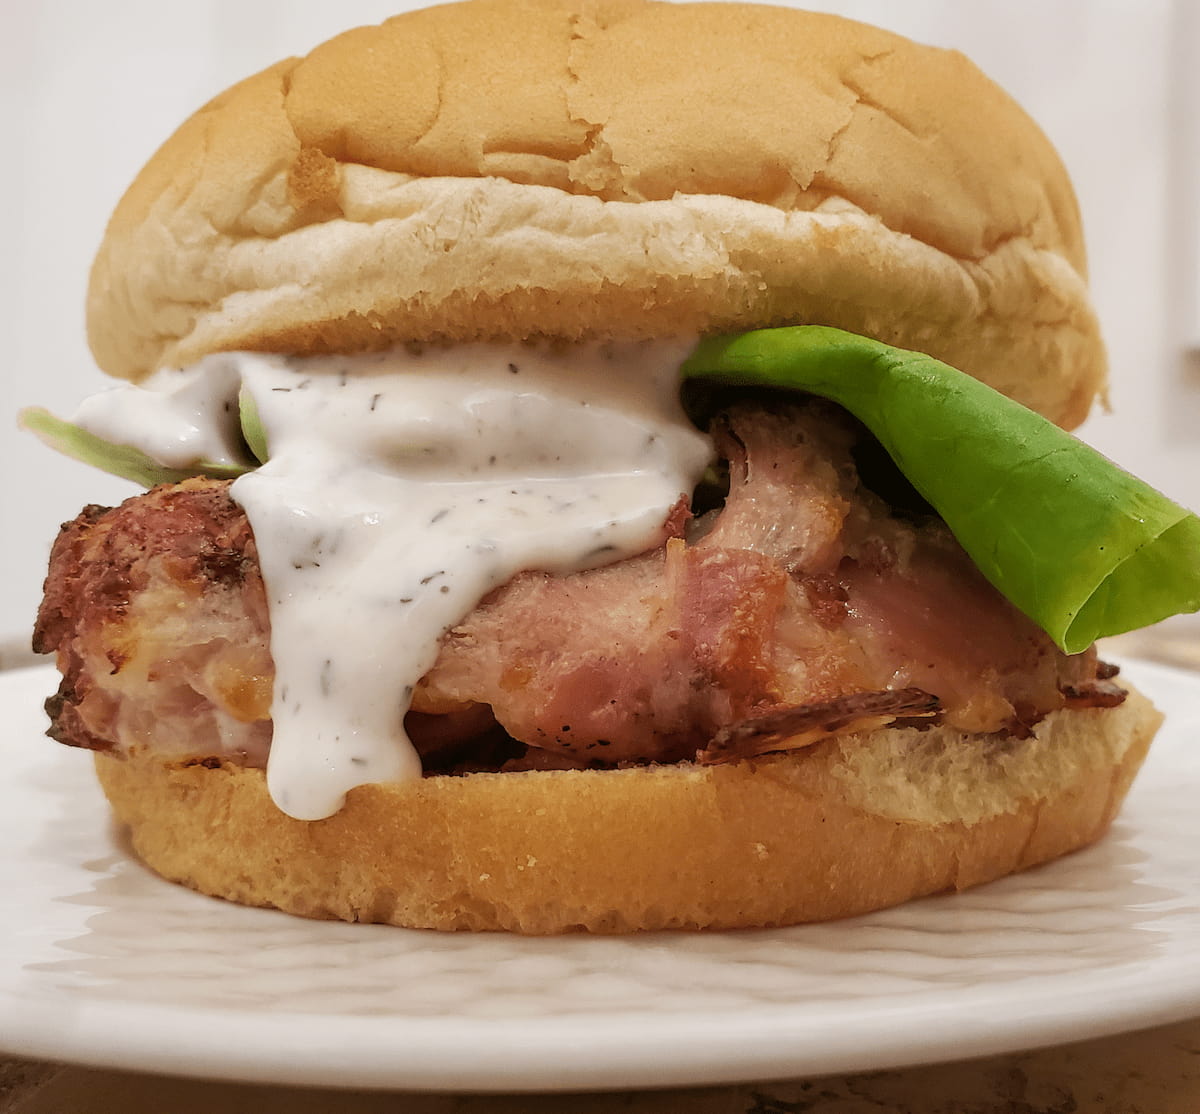 Chicken cake recipe on a bun with lettuce and ranch dressing. Recipe from cleveland cooking